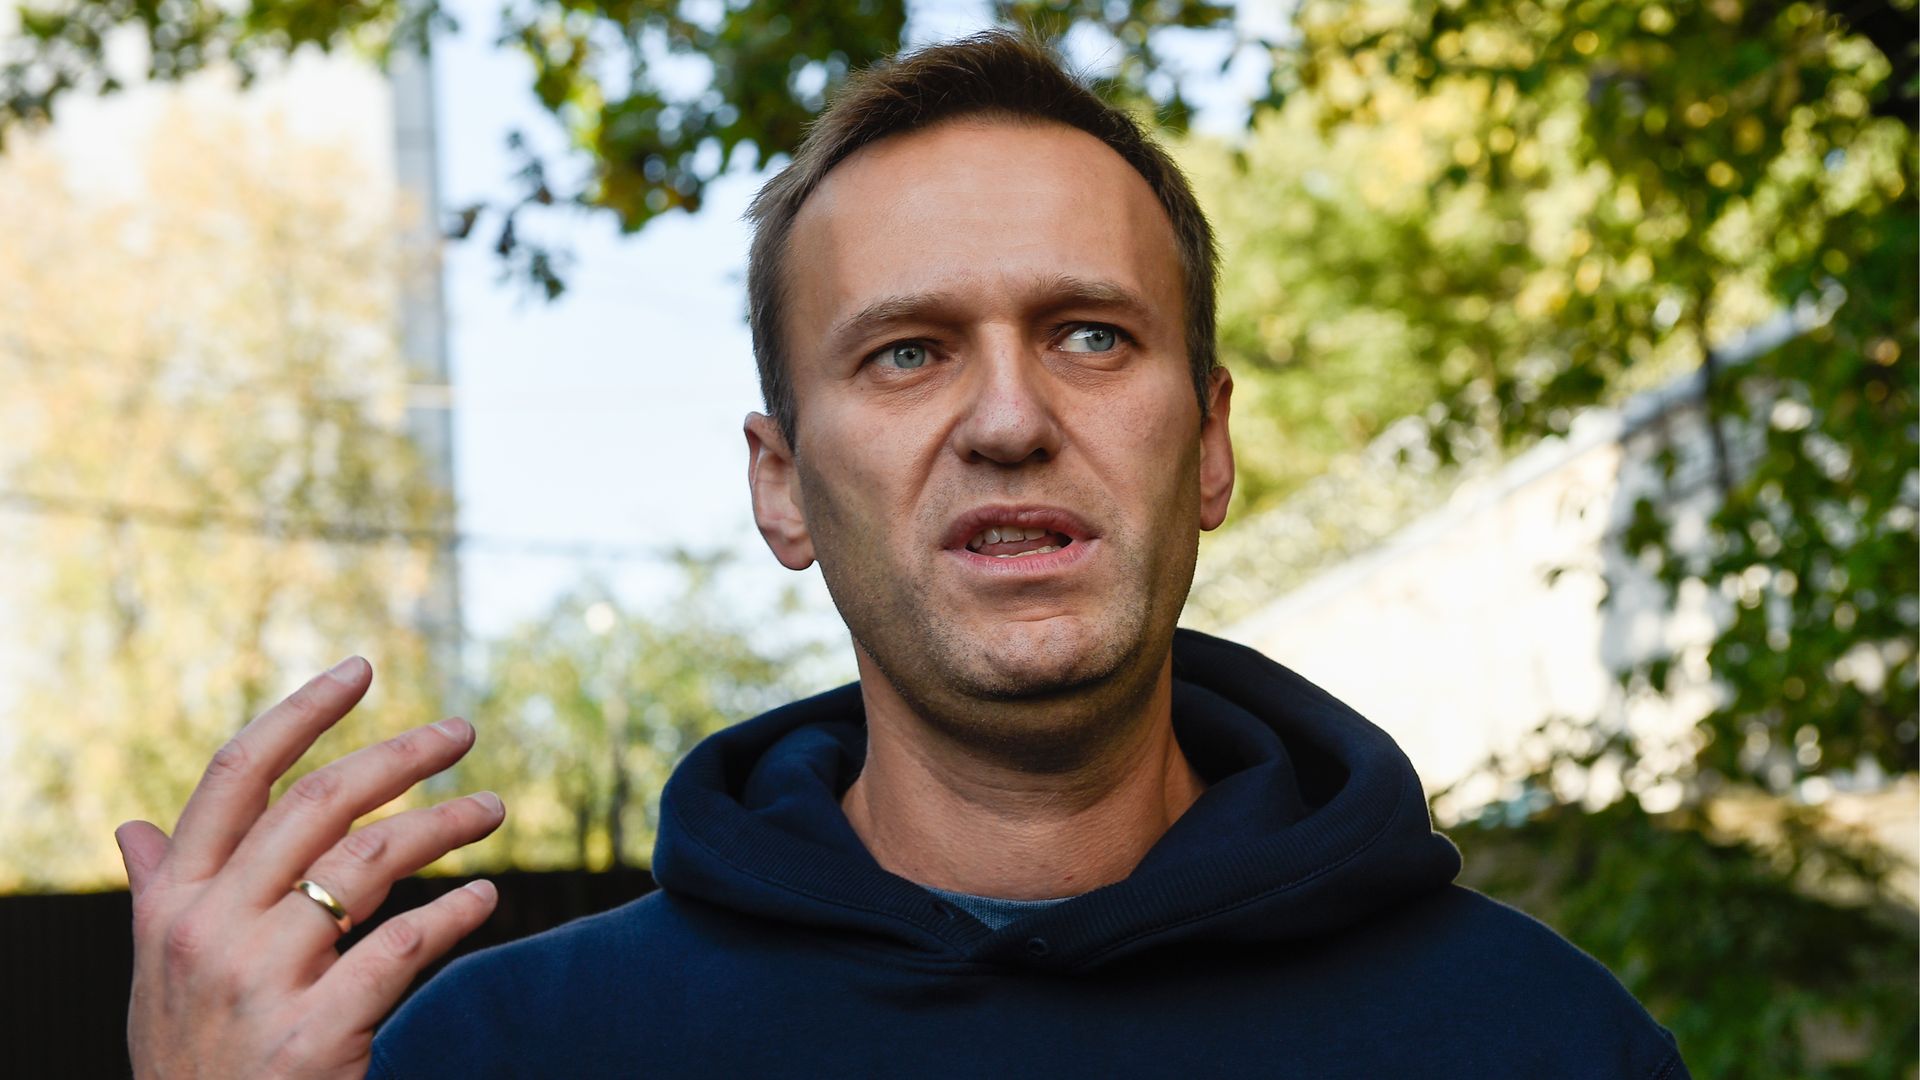 Opposition activist Alexei Navalny talks to the media after being released from 30 days of detention